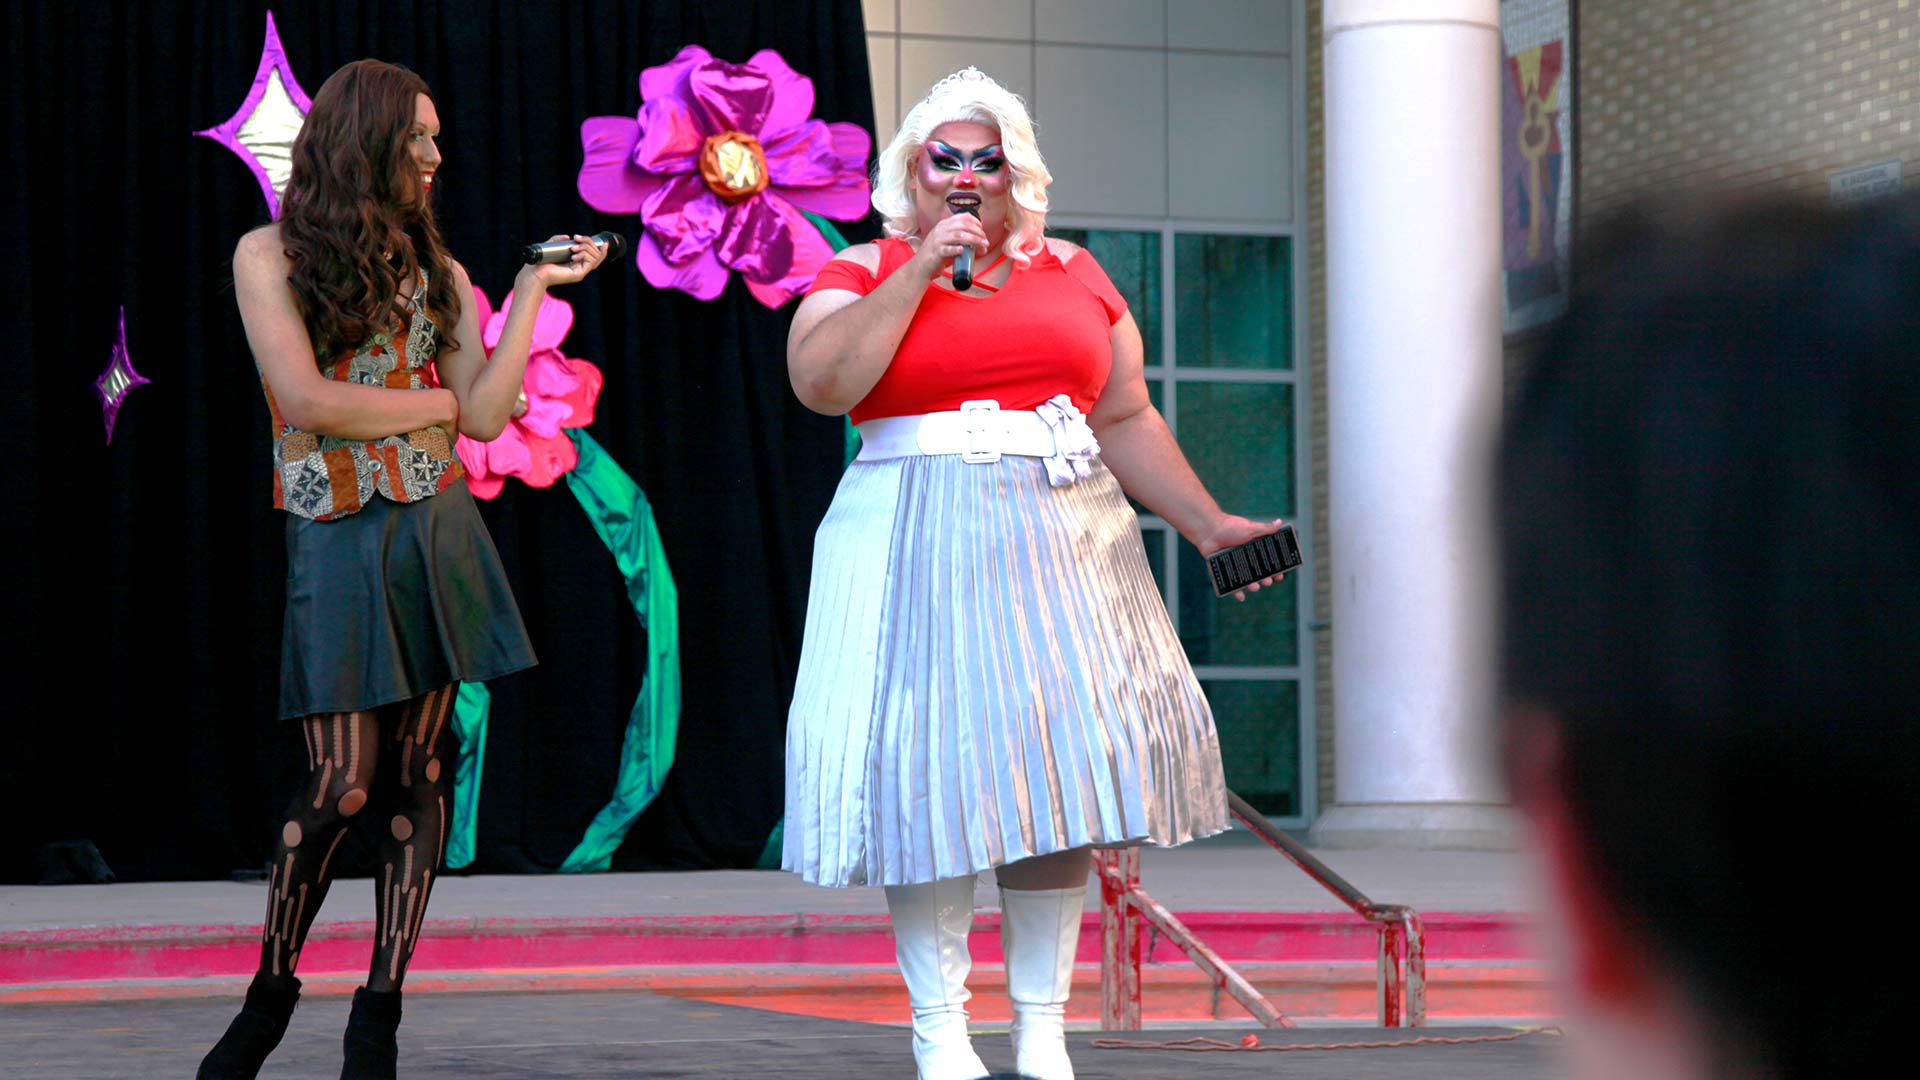 Meggan Mih Blushe, the drag persona of Adrian Molina, is hosting this year's second annual drag show at Tucson Magnet High School.